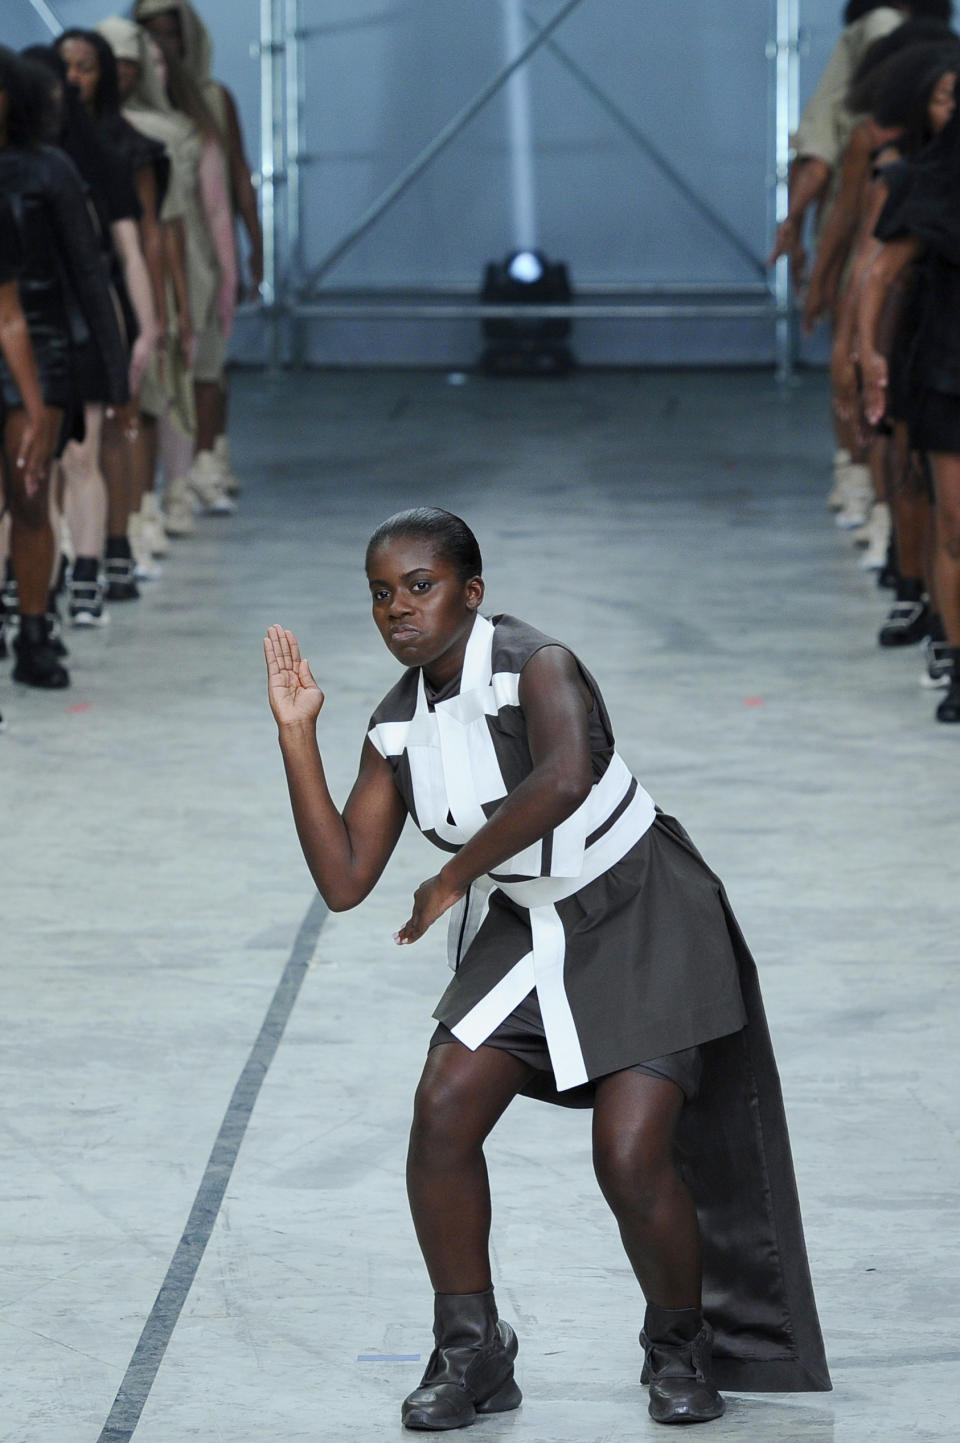 A model presents a creation as part of fashion designer Rick Owens ready-to-wear Spring/Summer 2014 fashion collection presented in Paris, Thursday, Sept. 26, 2013. (AP Photo/Zacharie Scheurer)